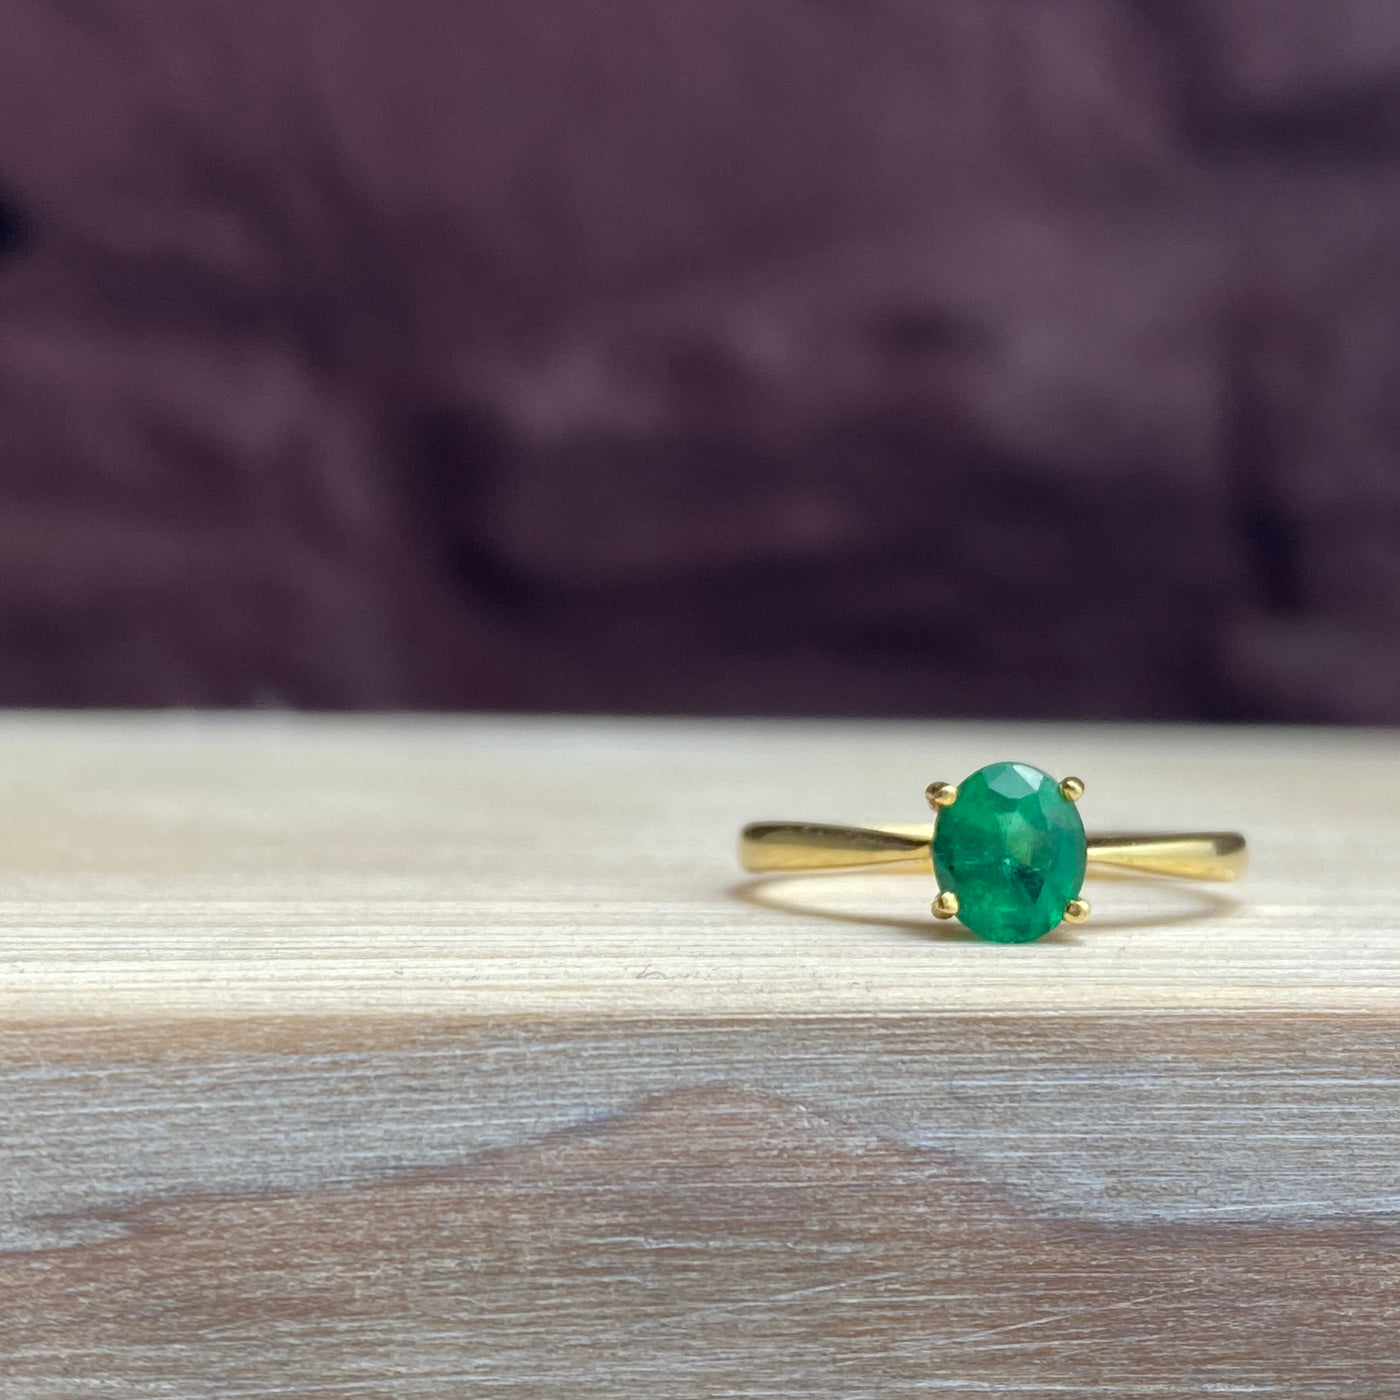 Oval faceted Emerald gemstone with four claw setting in 18ct yellow gold fine ring band on a wooden surface and purple background wall